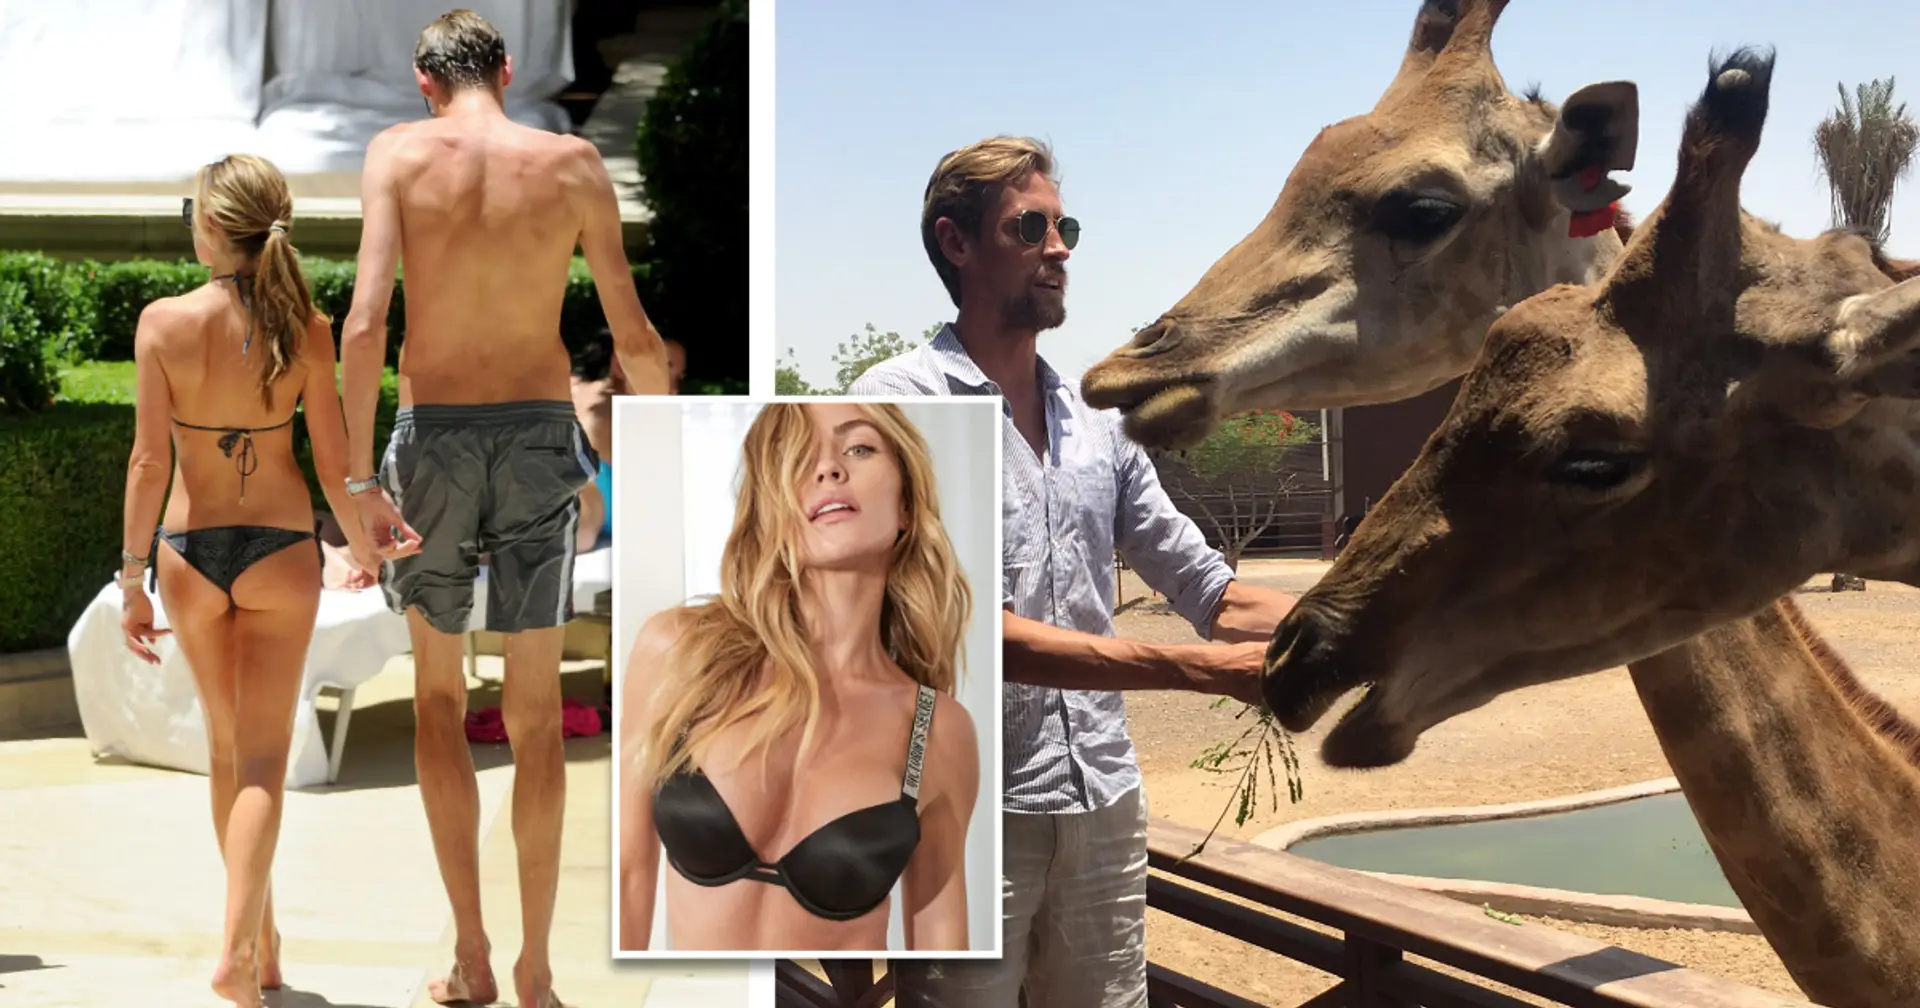 'The long legs, the tiny arse and the balls just dangling down in the middle': Peter Crouch's wife compares her husband to a giraffe